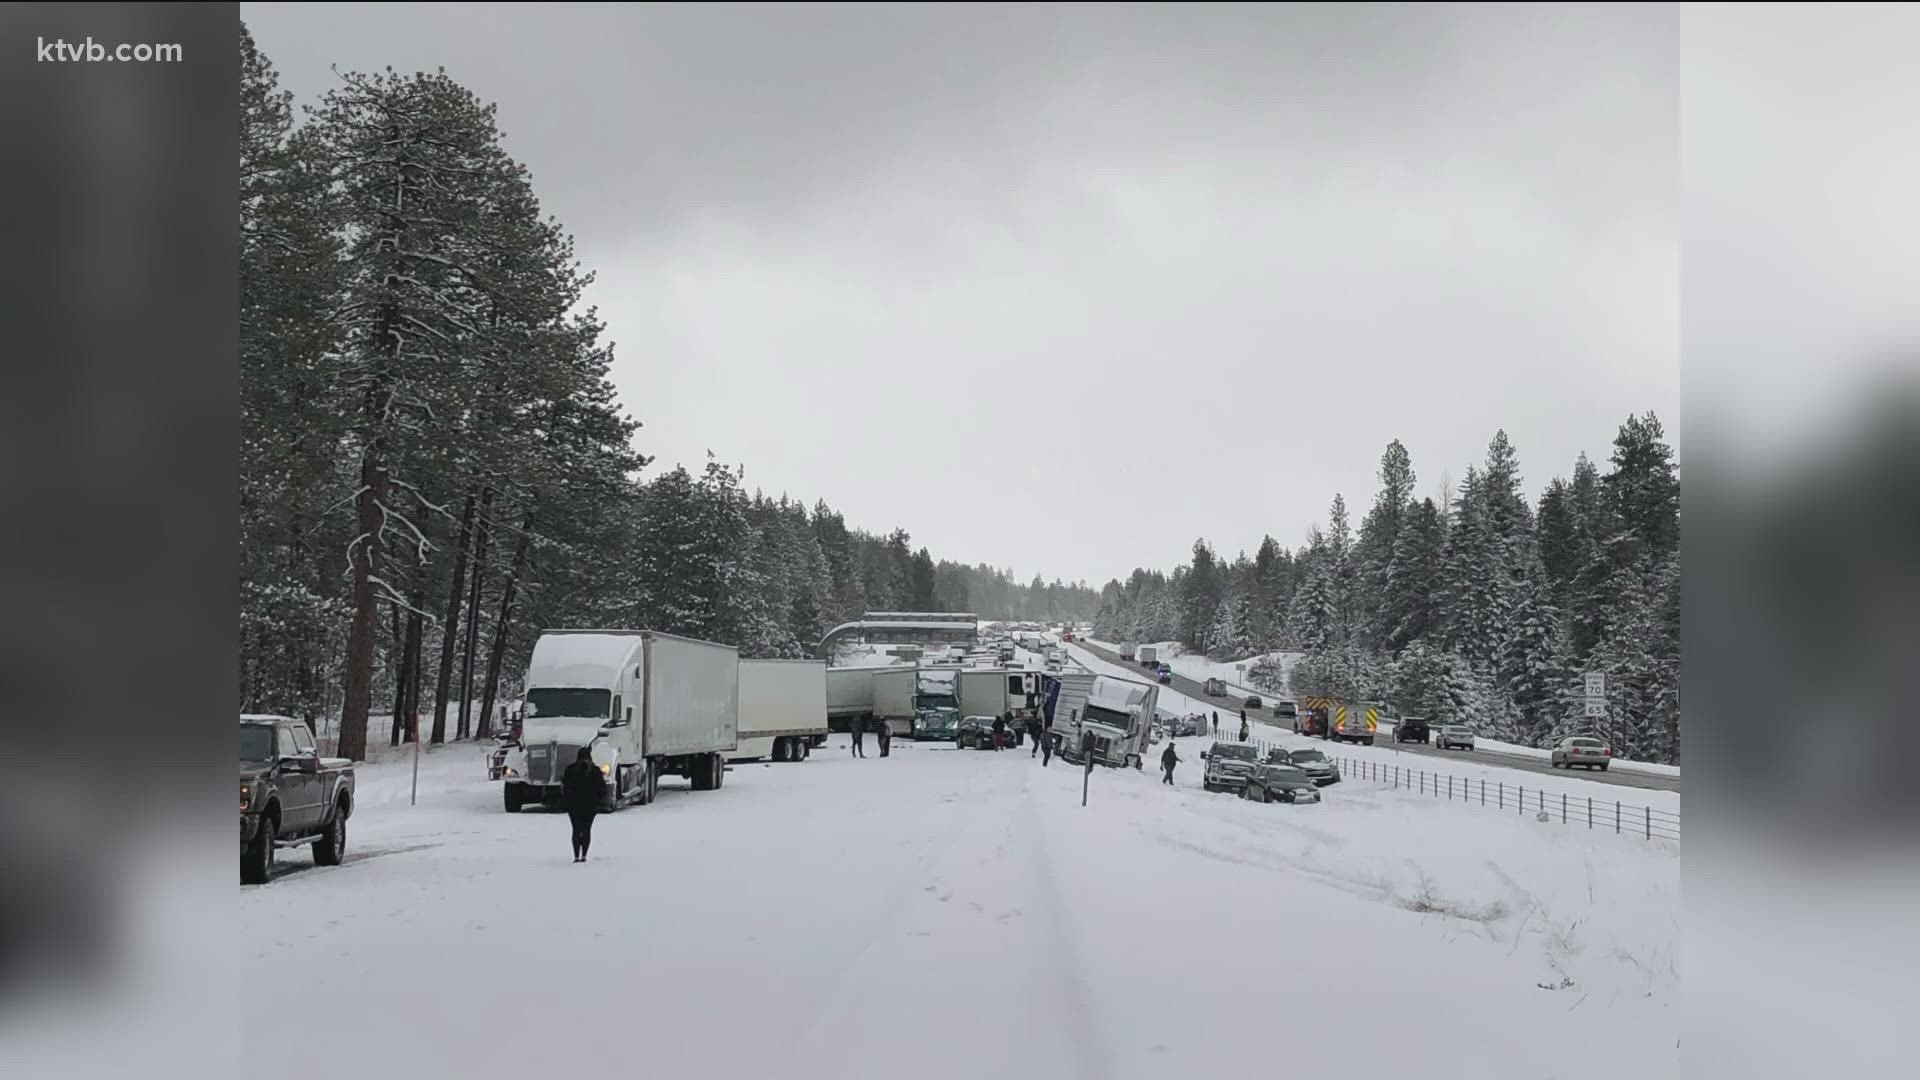 ODOT announced that I-84 is currently closed in both directions due to multiple crashes near milepost 230.